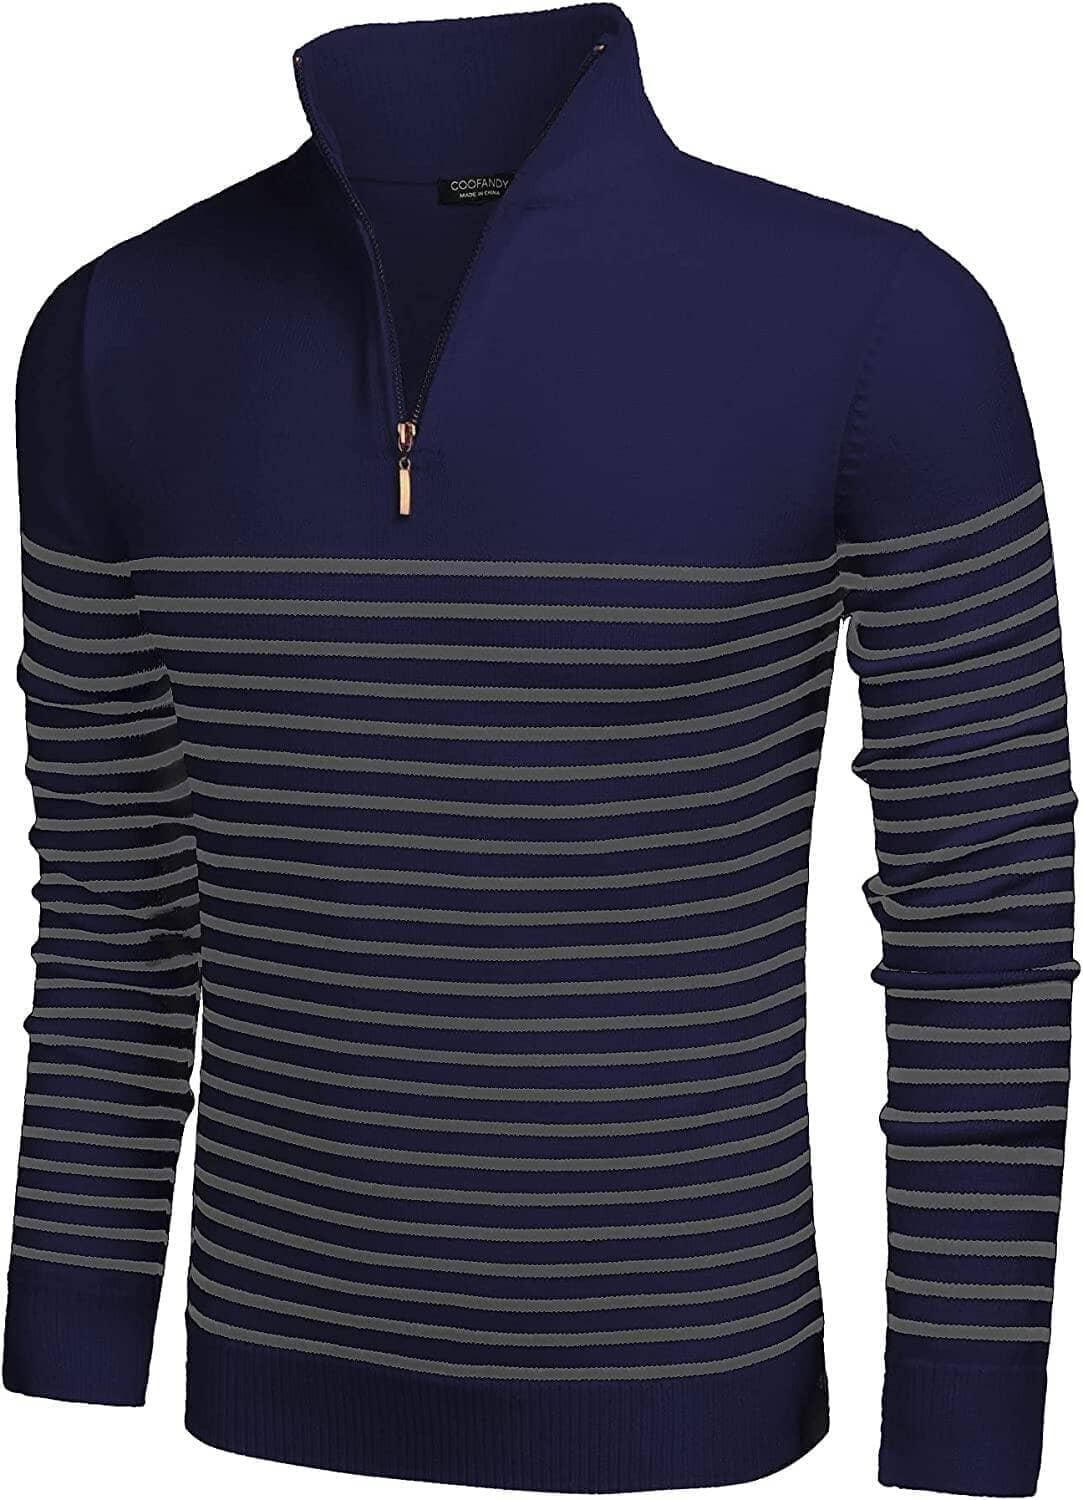 Coofandy Striped Zip Up Mock Neck Pullover Sweaters (US Only) Fashion Hoodies & Sweatshirts Simbama Royal Blue S 